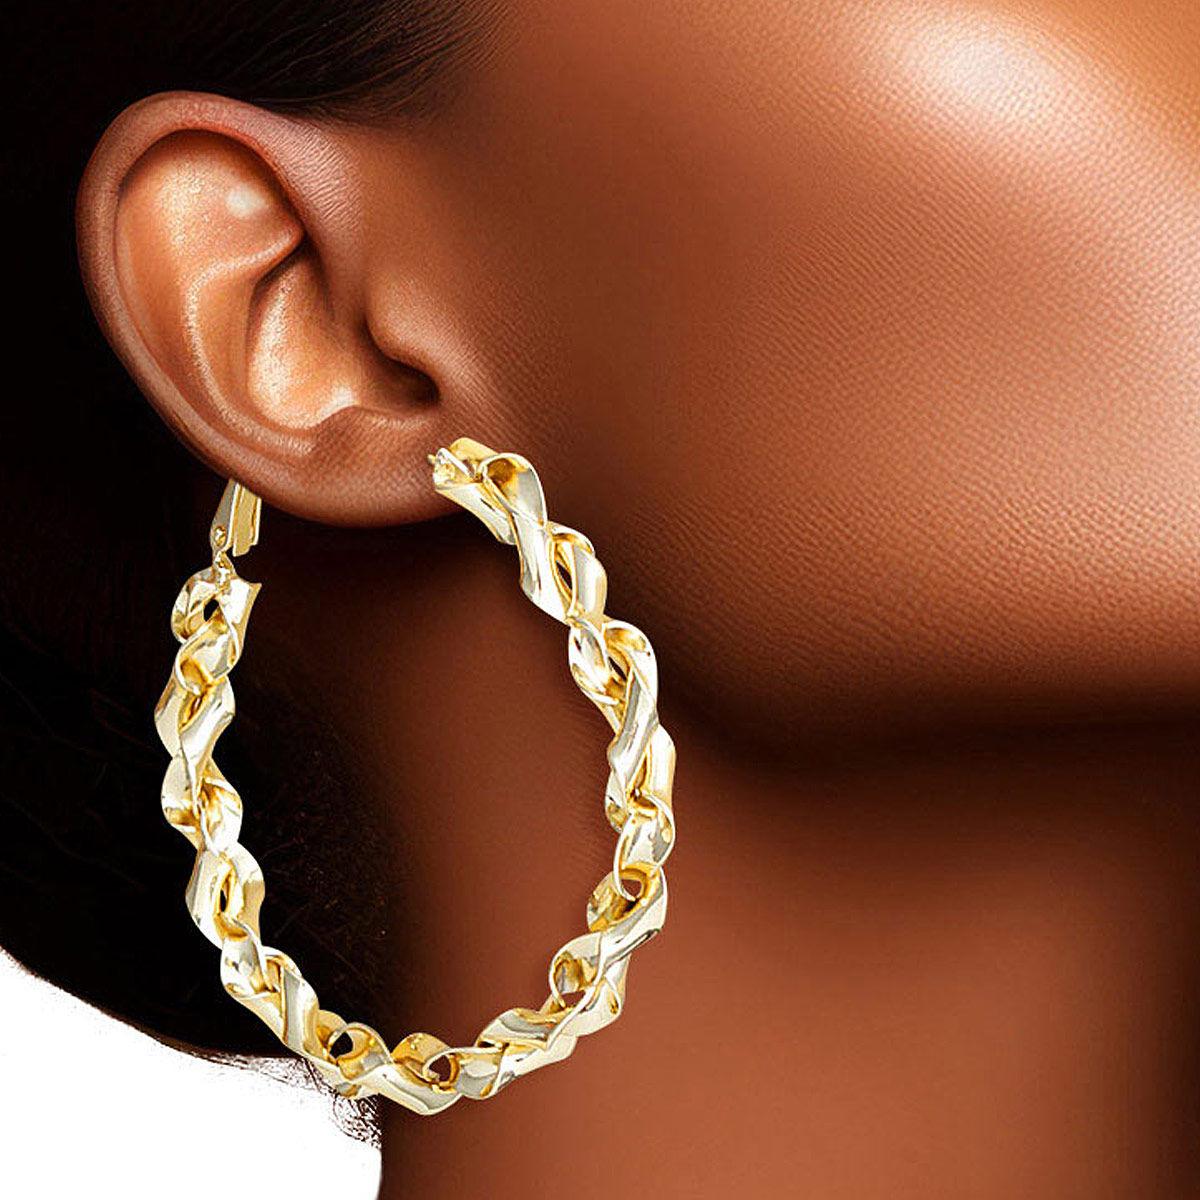 Get Ready to Slay with Twisted Gold Finish Hoop Earrings: Stand Out!